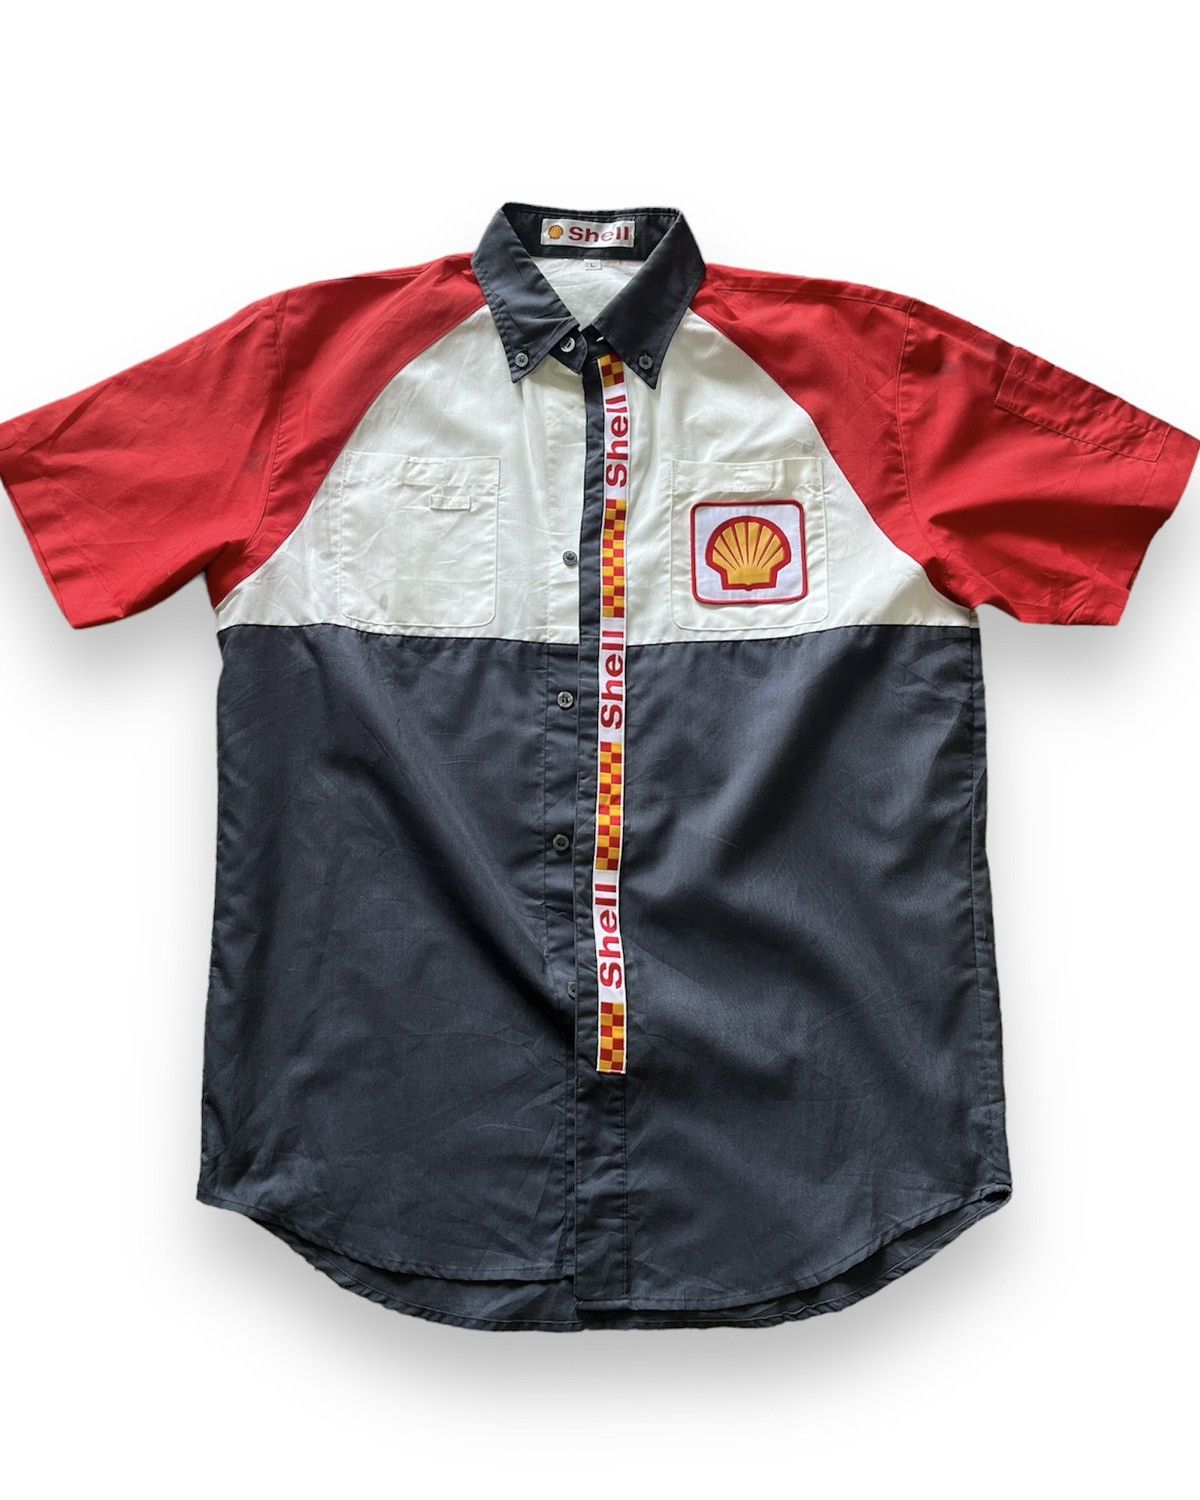 Vintage Shell Workers Uniform Shirts Japan - 1